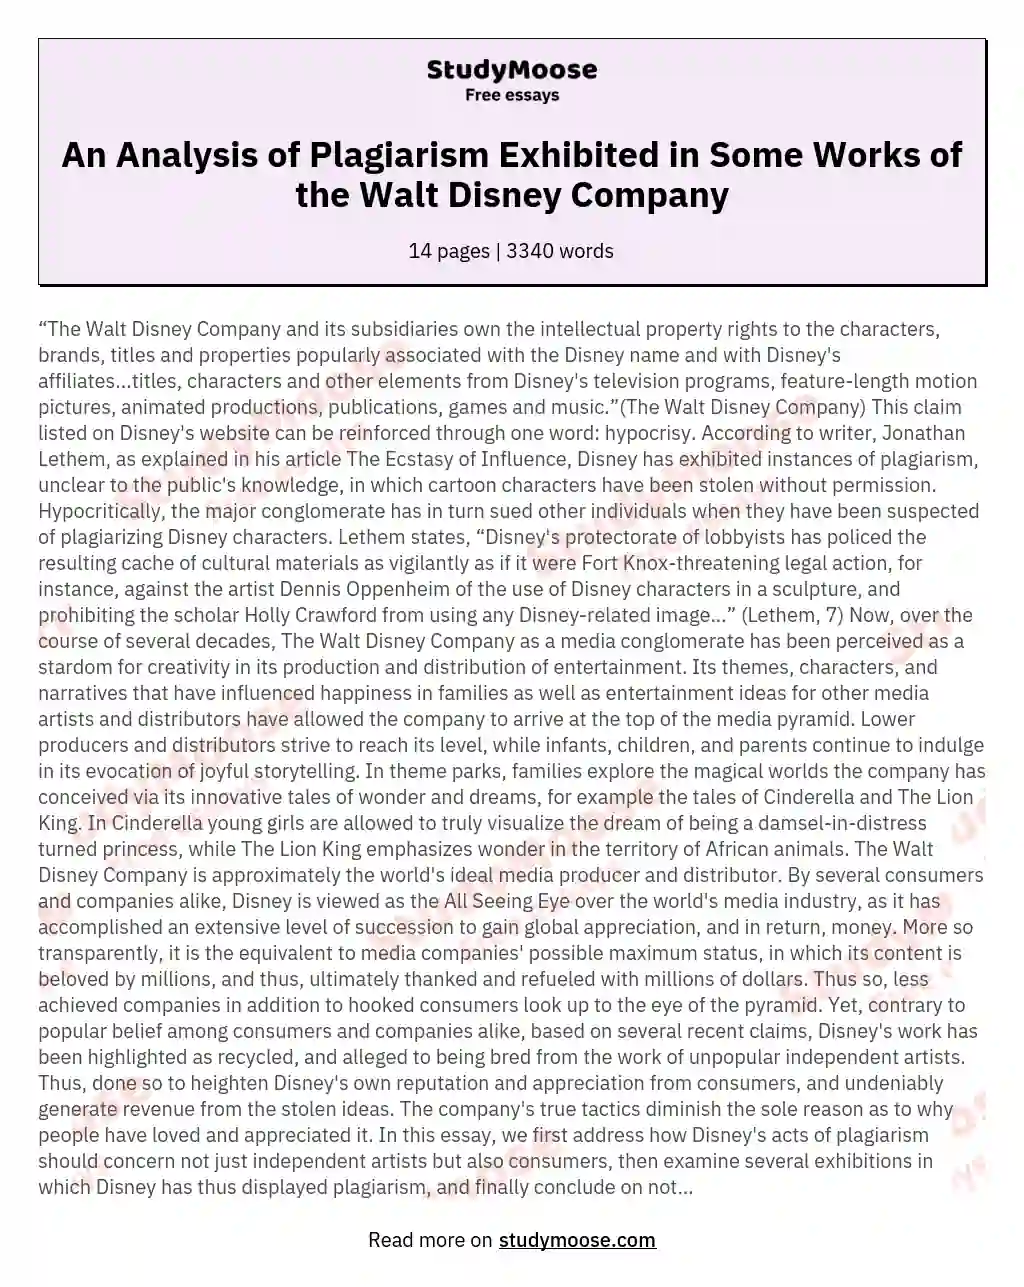 An Analysis of Plagiarism Exhibited in Some Works of the Walt Disney Company essay